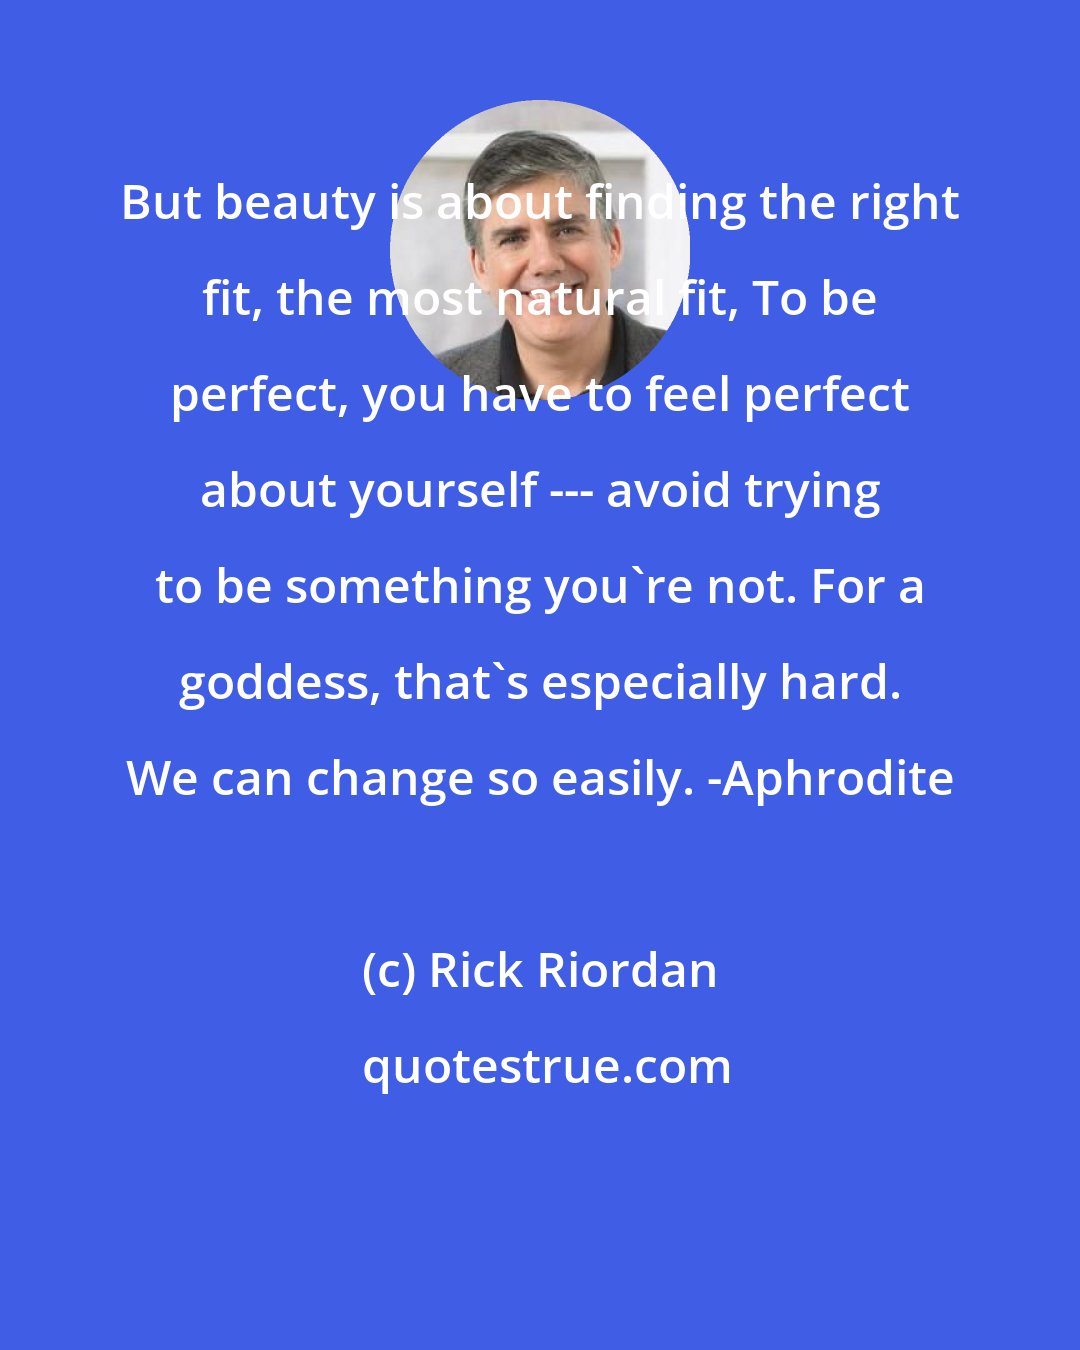 Rick Riordan: But beauty is about finding the right fit, the most natural fit, To be perfect, you have to feel perfect about yourself --- avoid trying to be something you're not. For a goddess, that's especially hard. We can change so easily. -Aphrodite